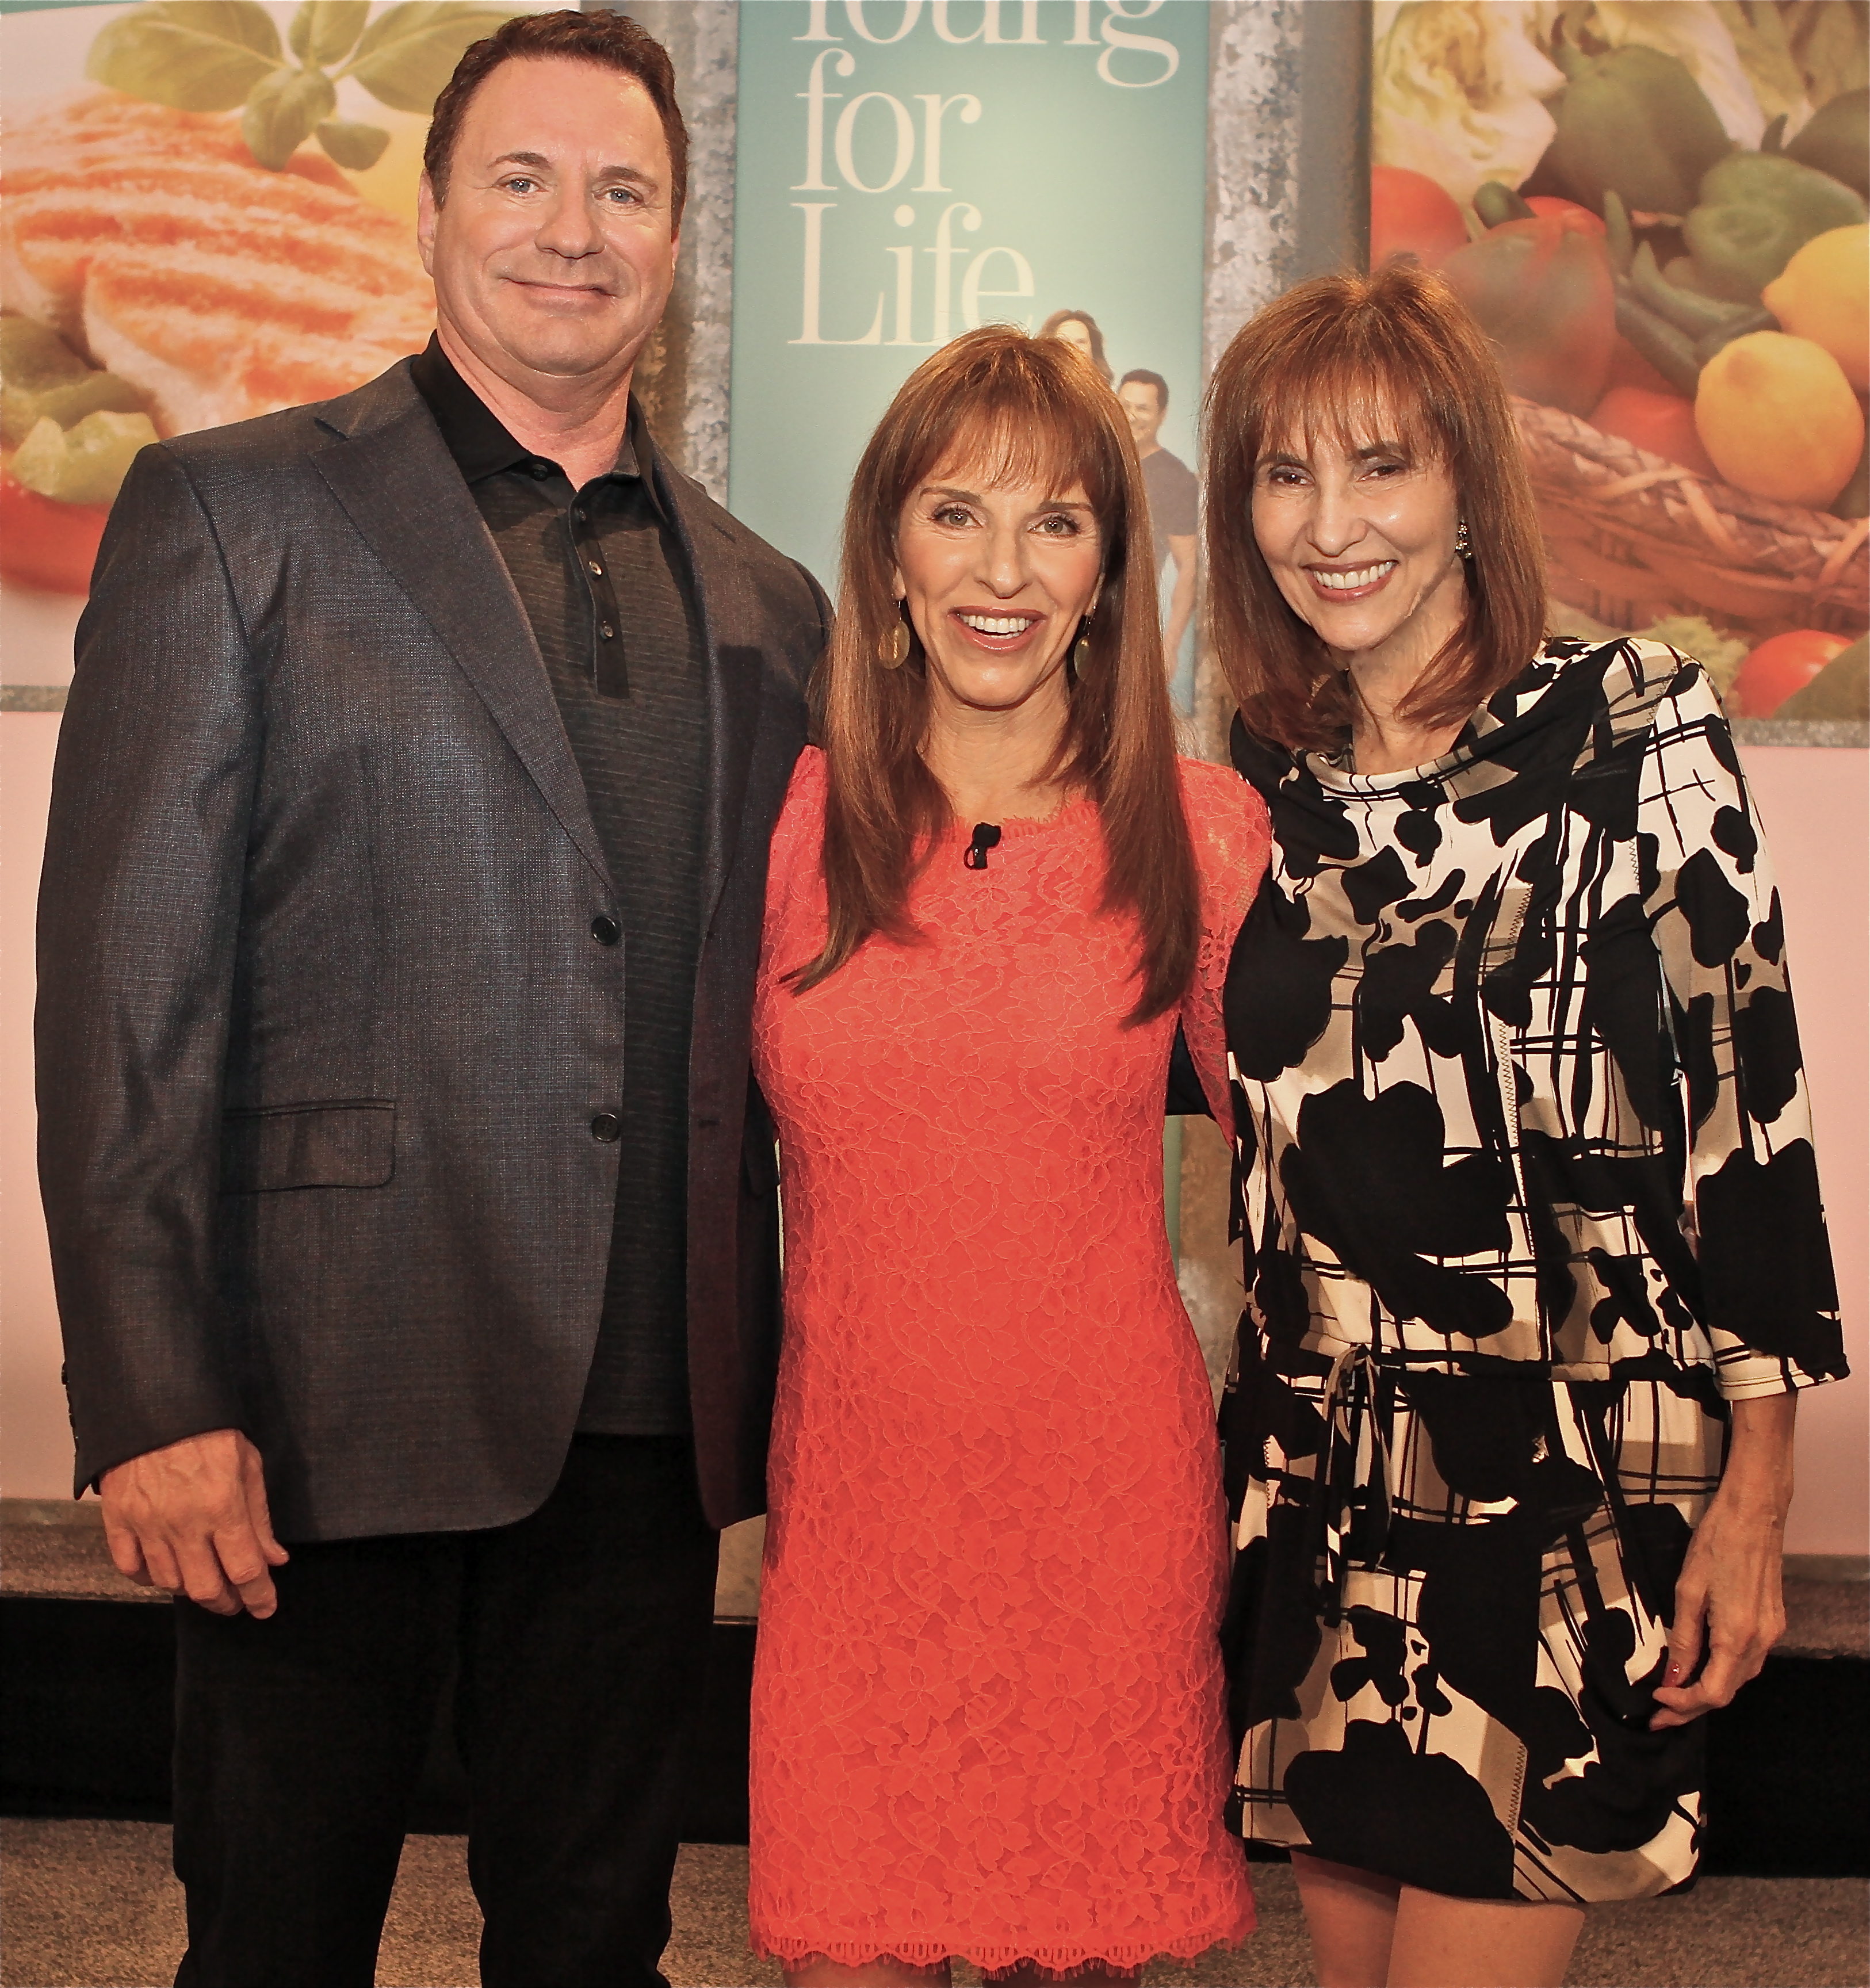 Dr. Rock, Marilyn Diamond and Carole Myers at Young for Life taping, KCET, Los Angeles 2013